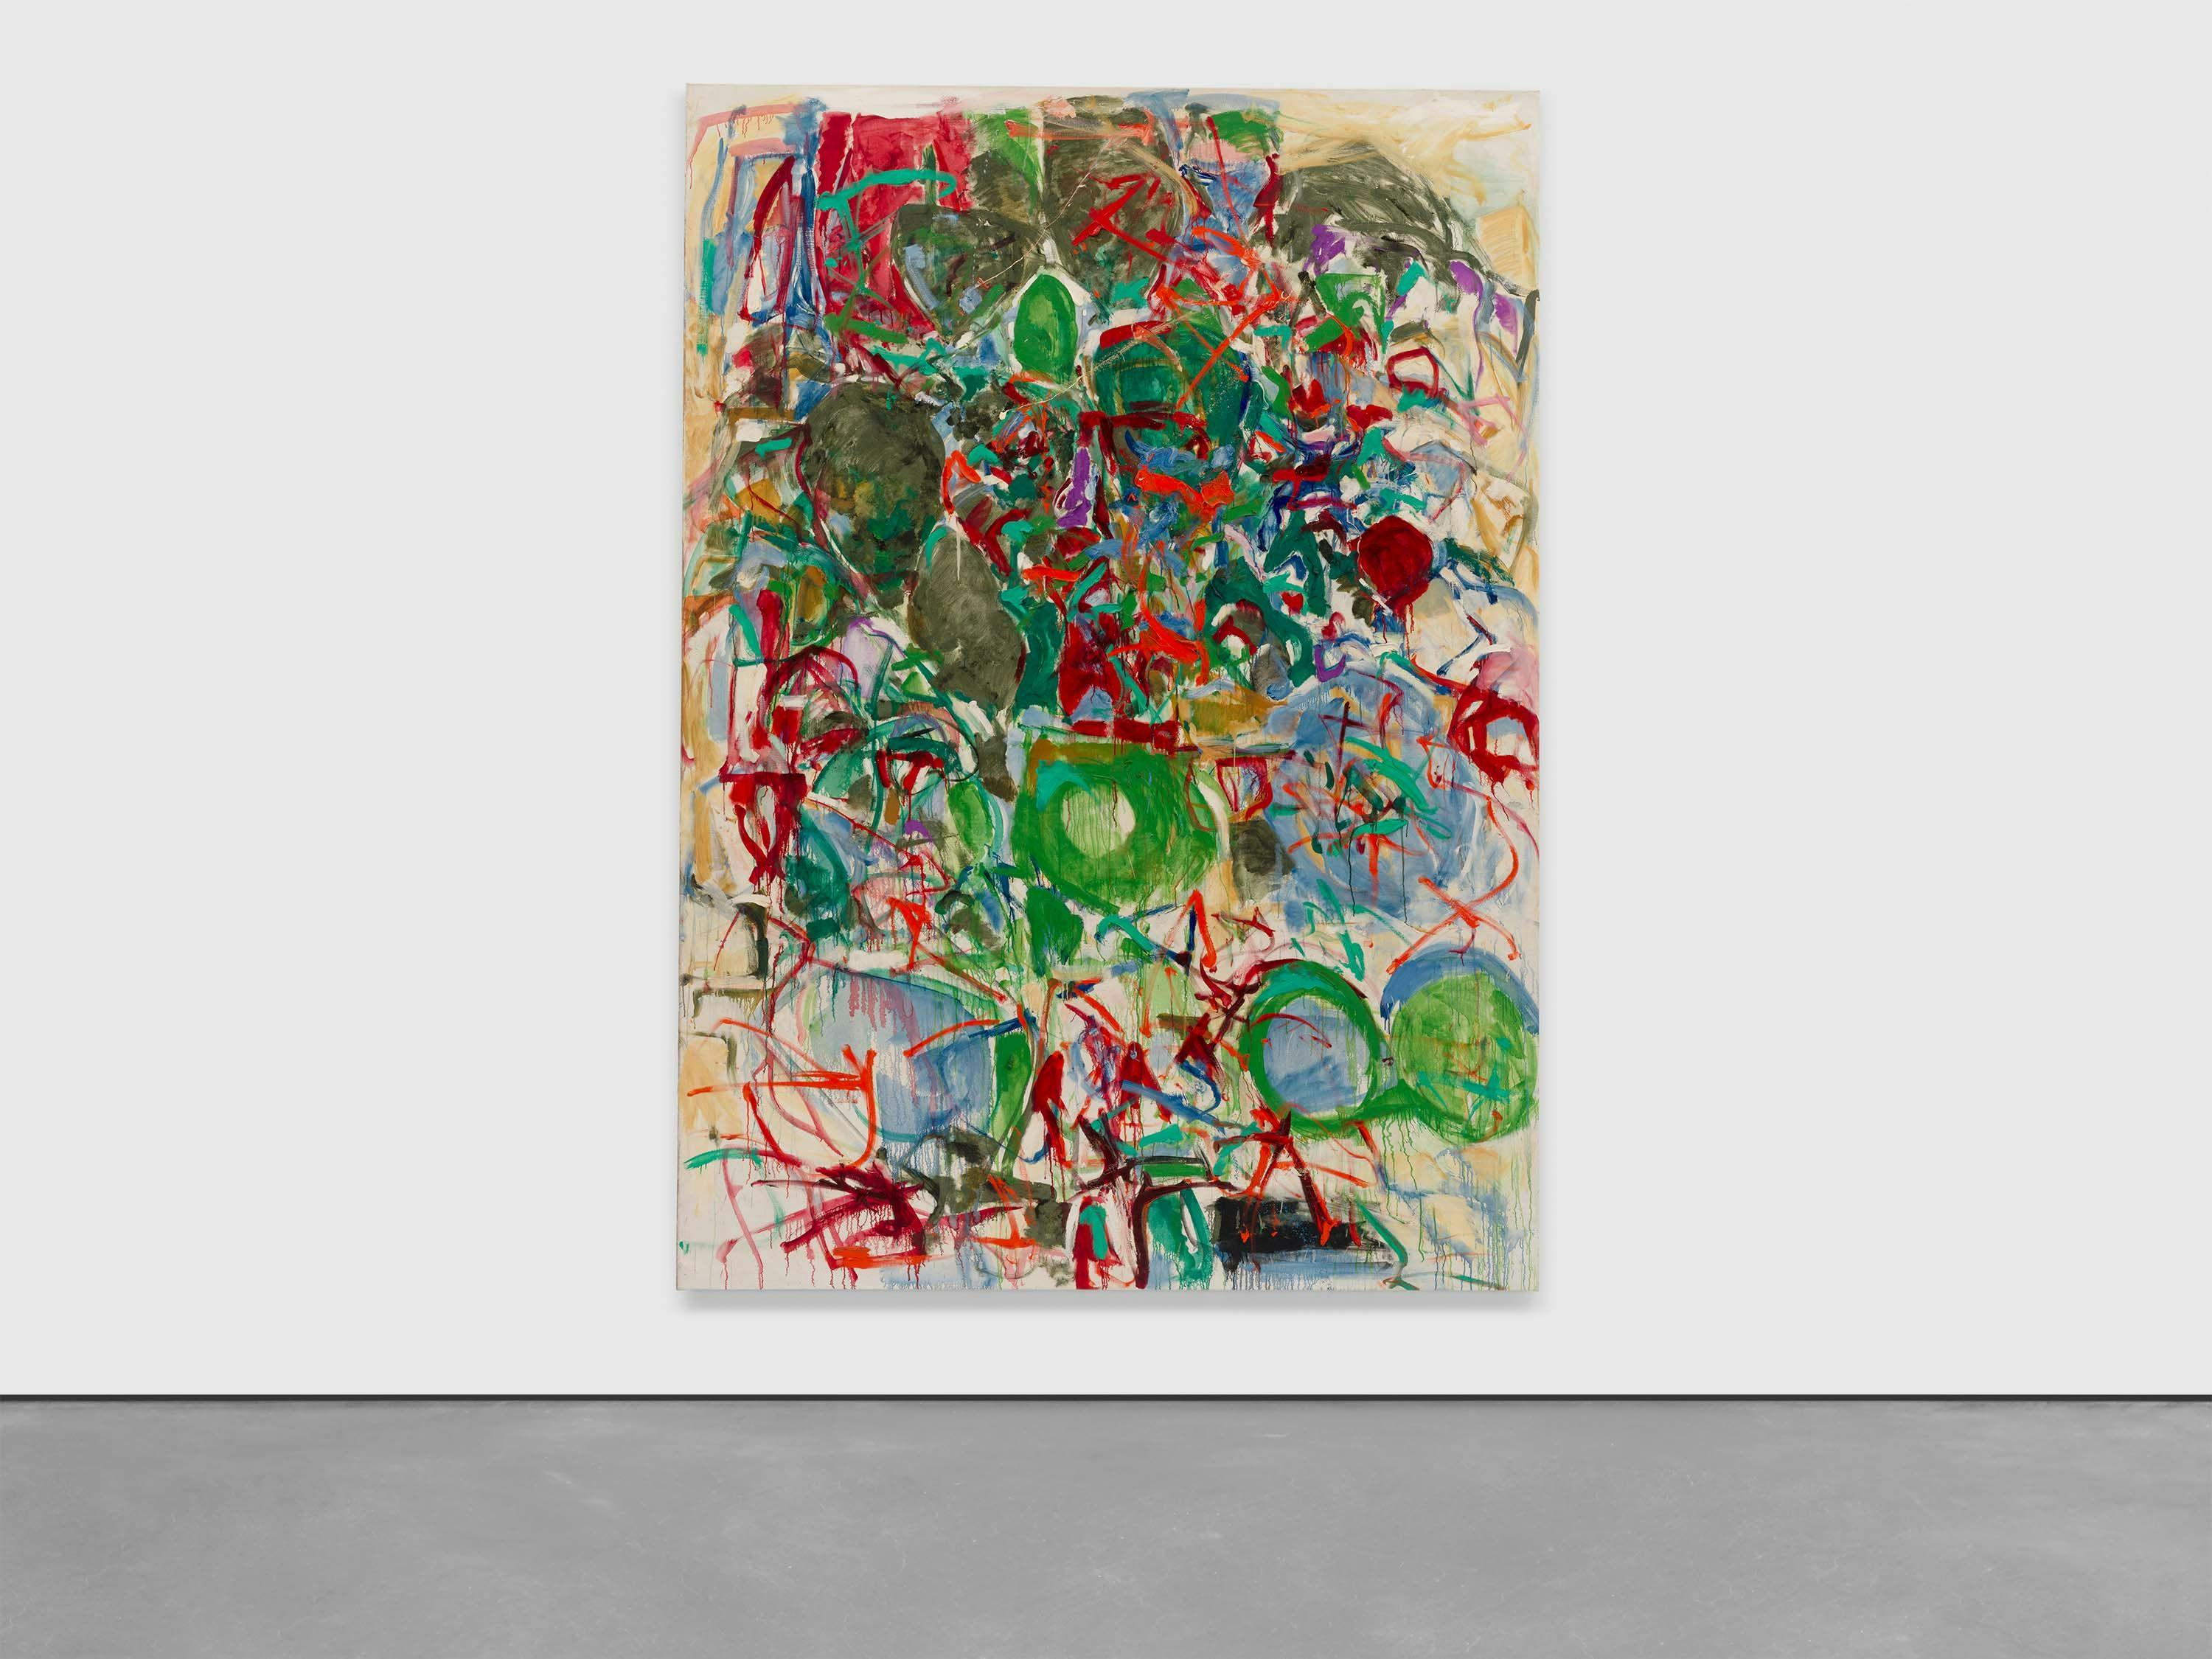 An untitled painting by Joan Mitchell, dated circa 1967.